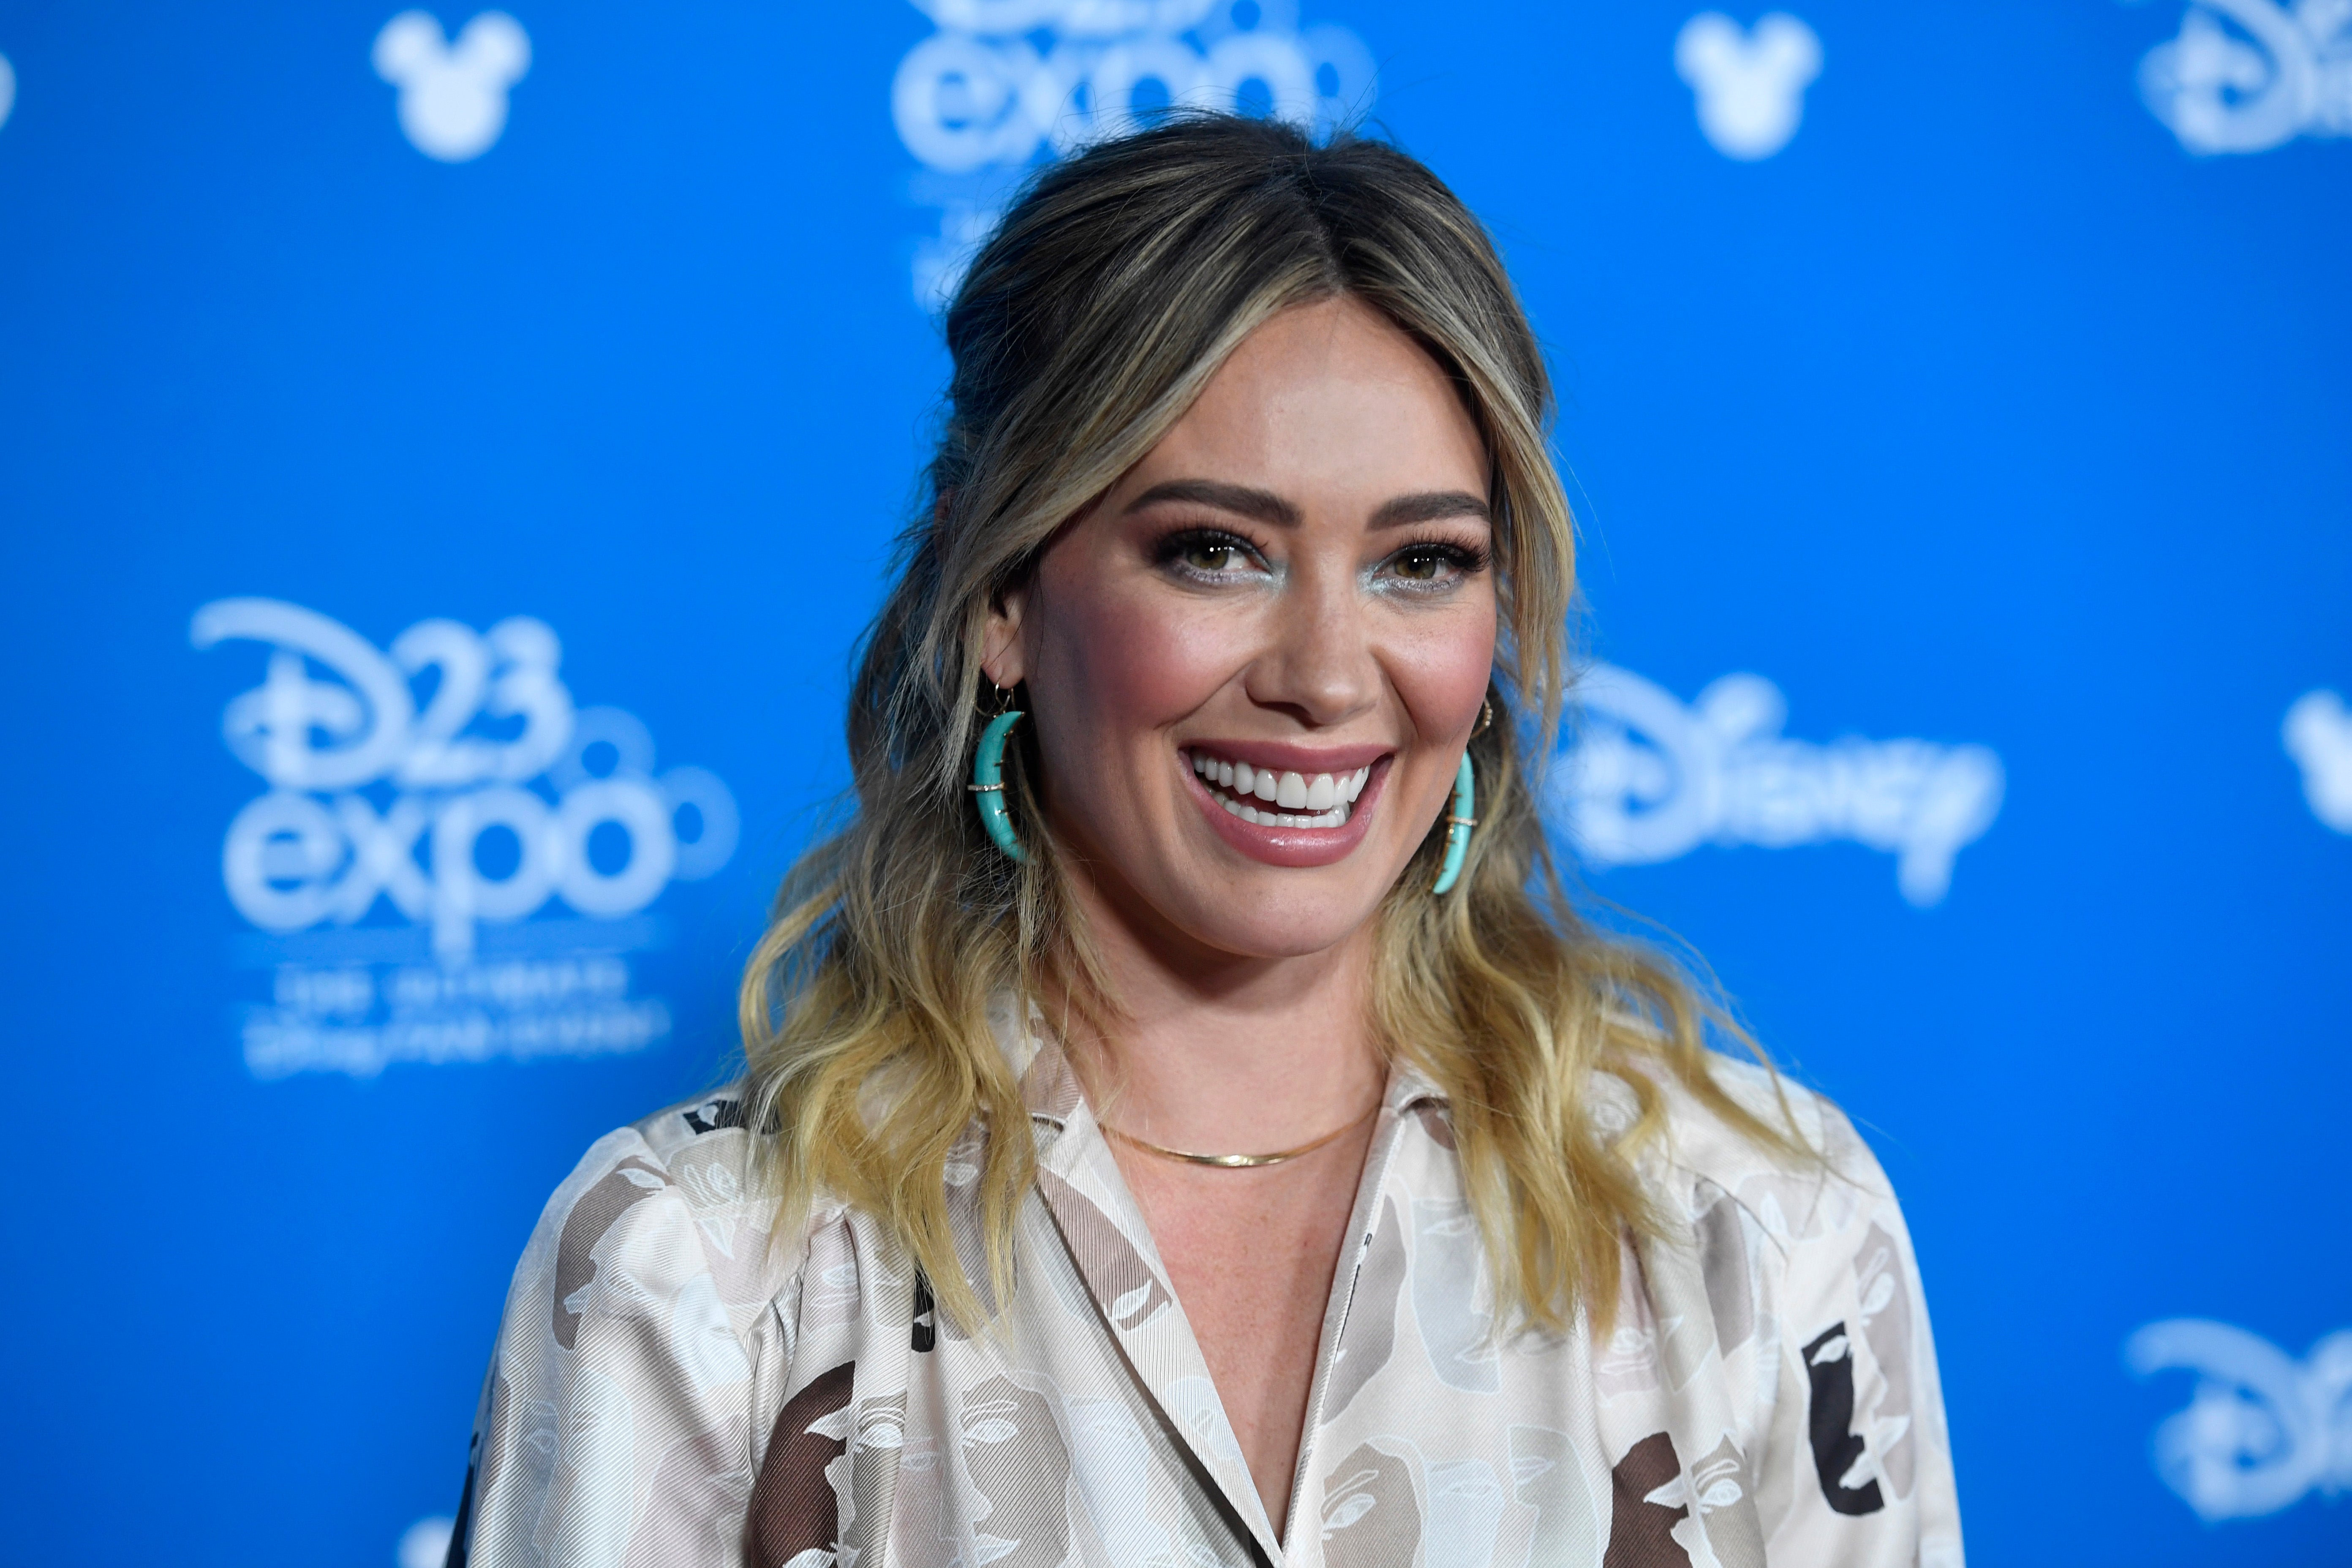 Hilary Duff shares photos from home birth of daughter Mae